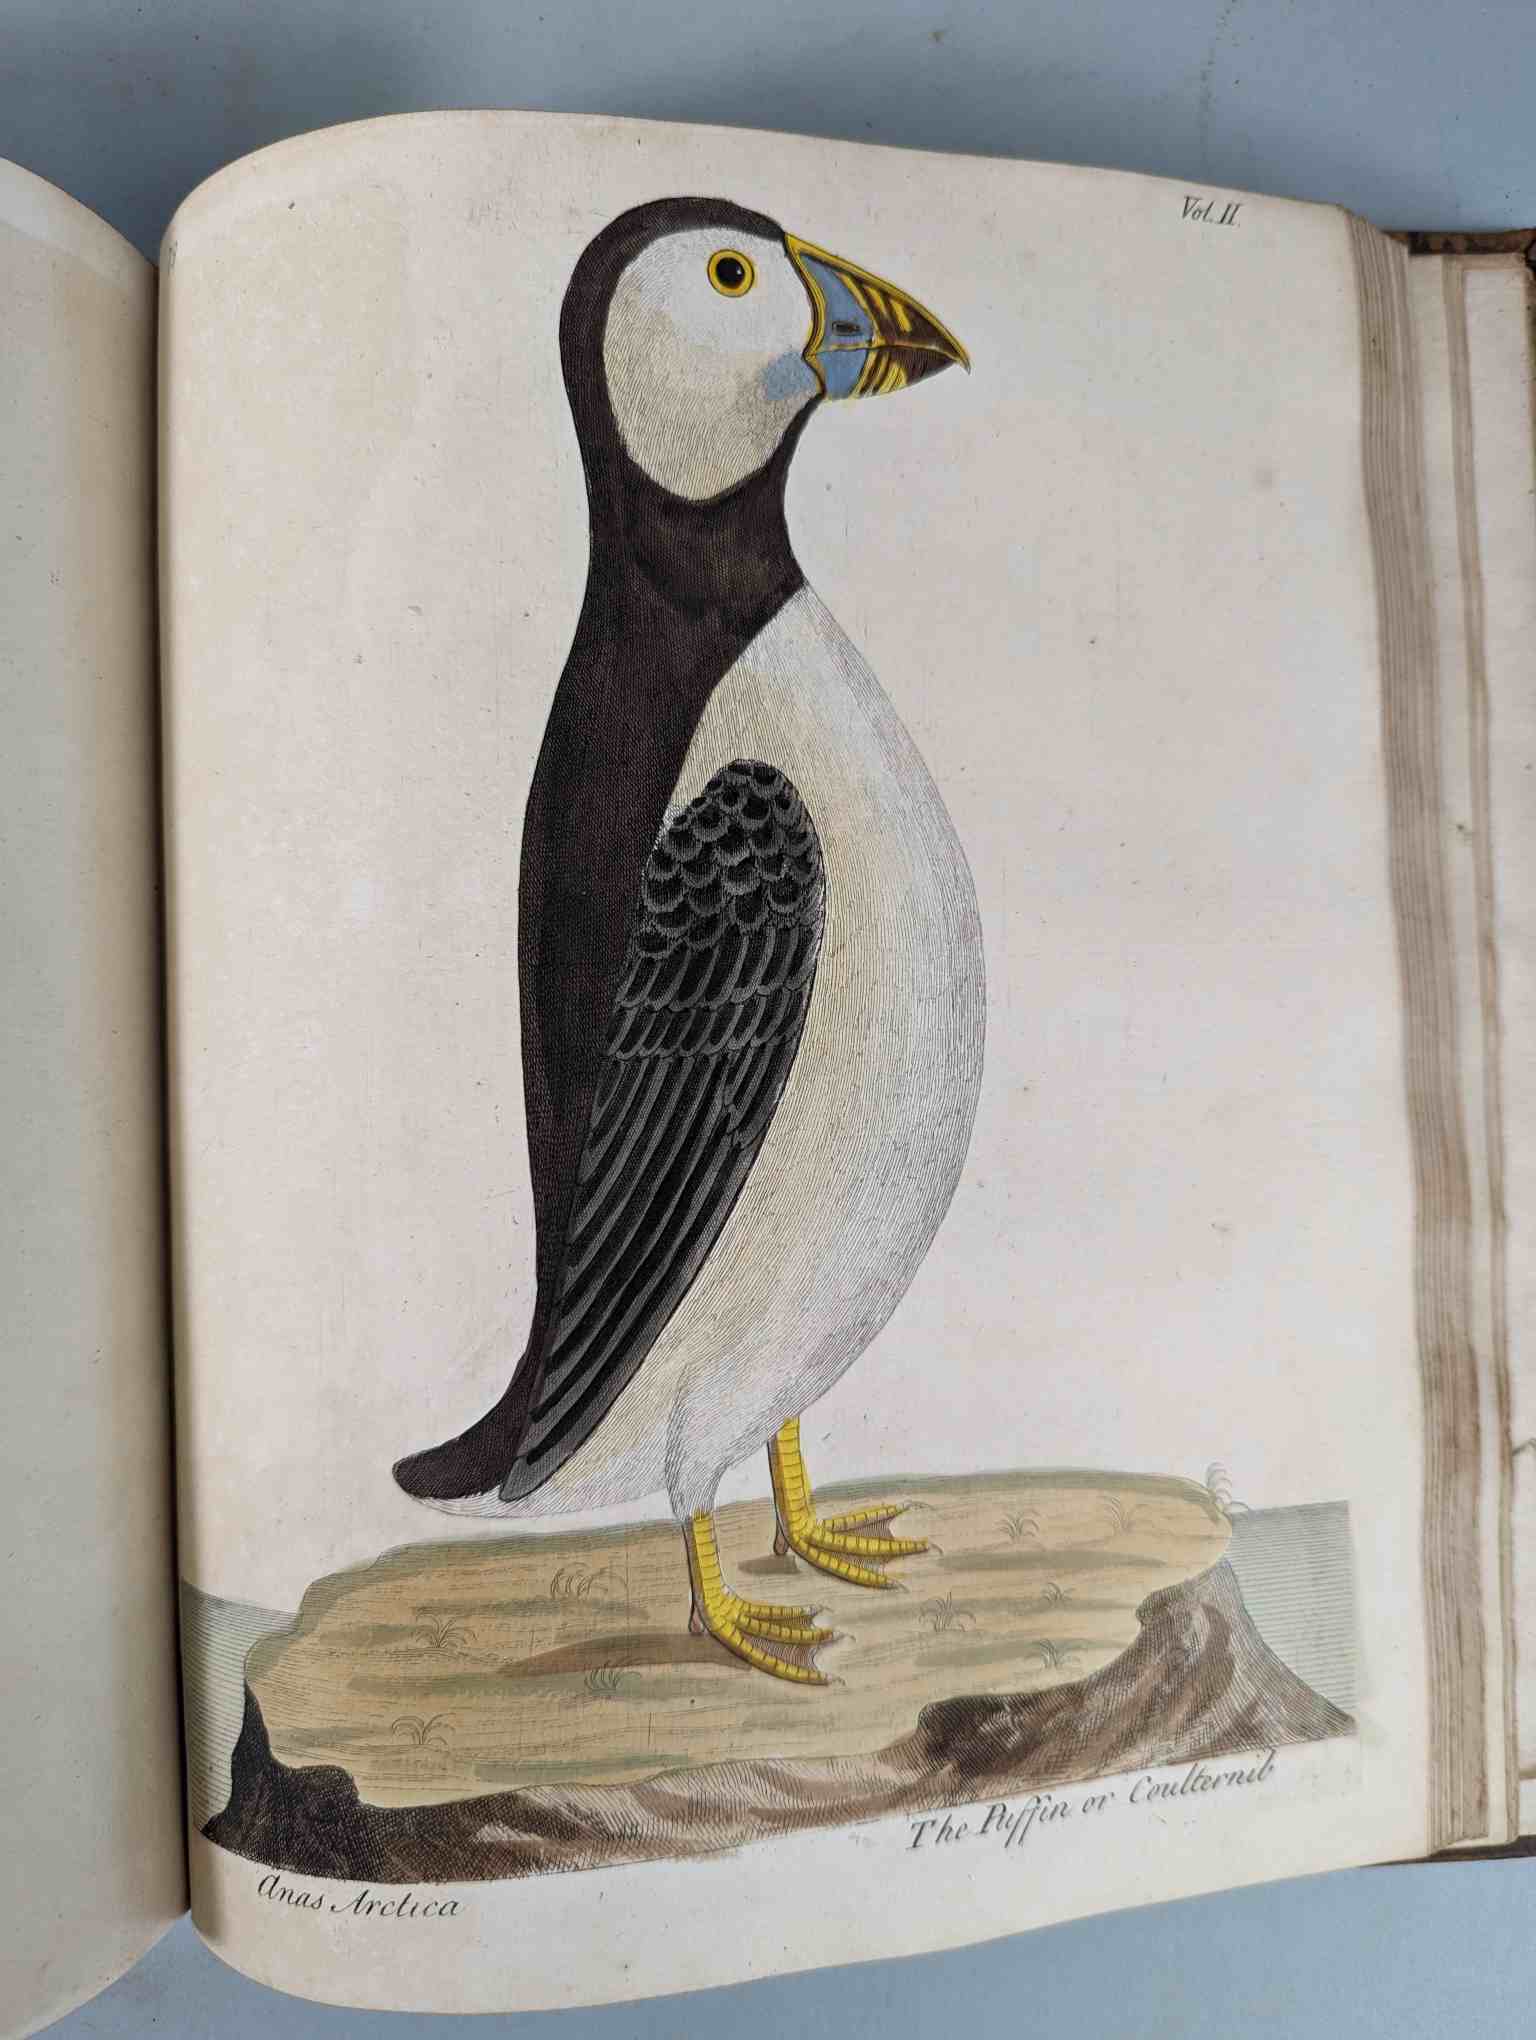 ALBIN, Eleazar. A Natural History of Birds, to which are added, Notes and Observations by W. - Image 183 of 208